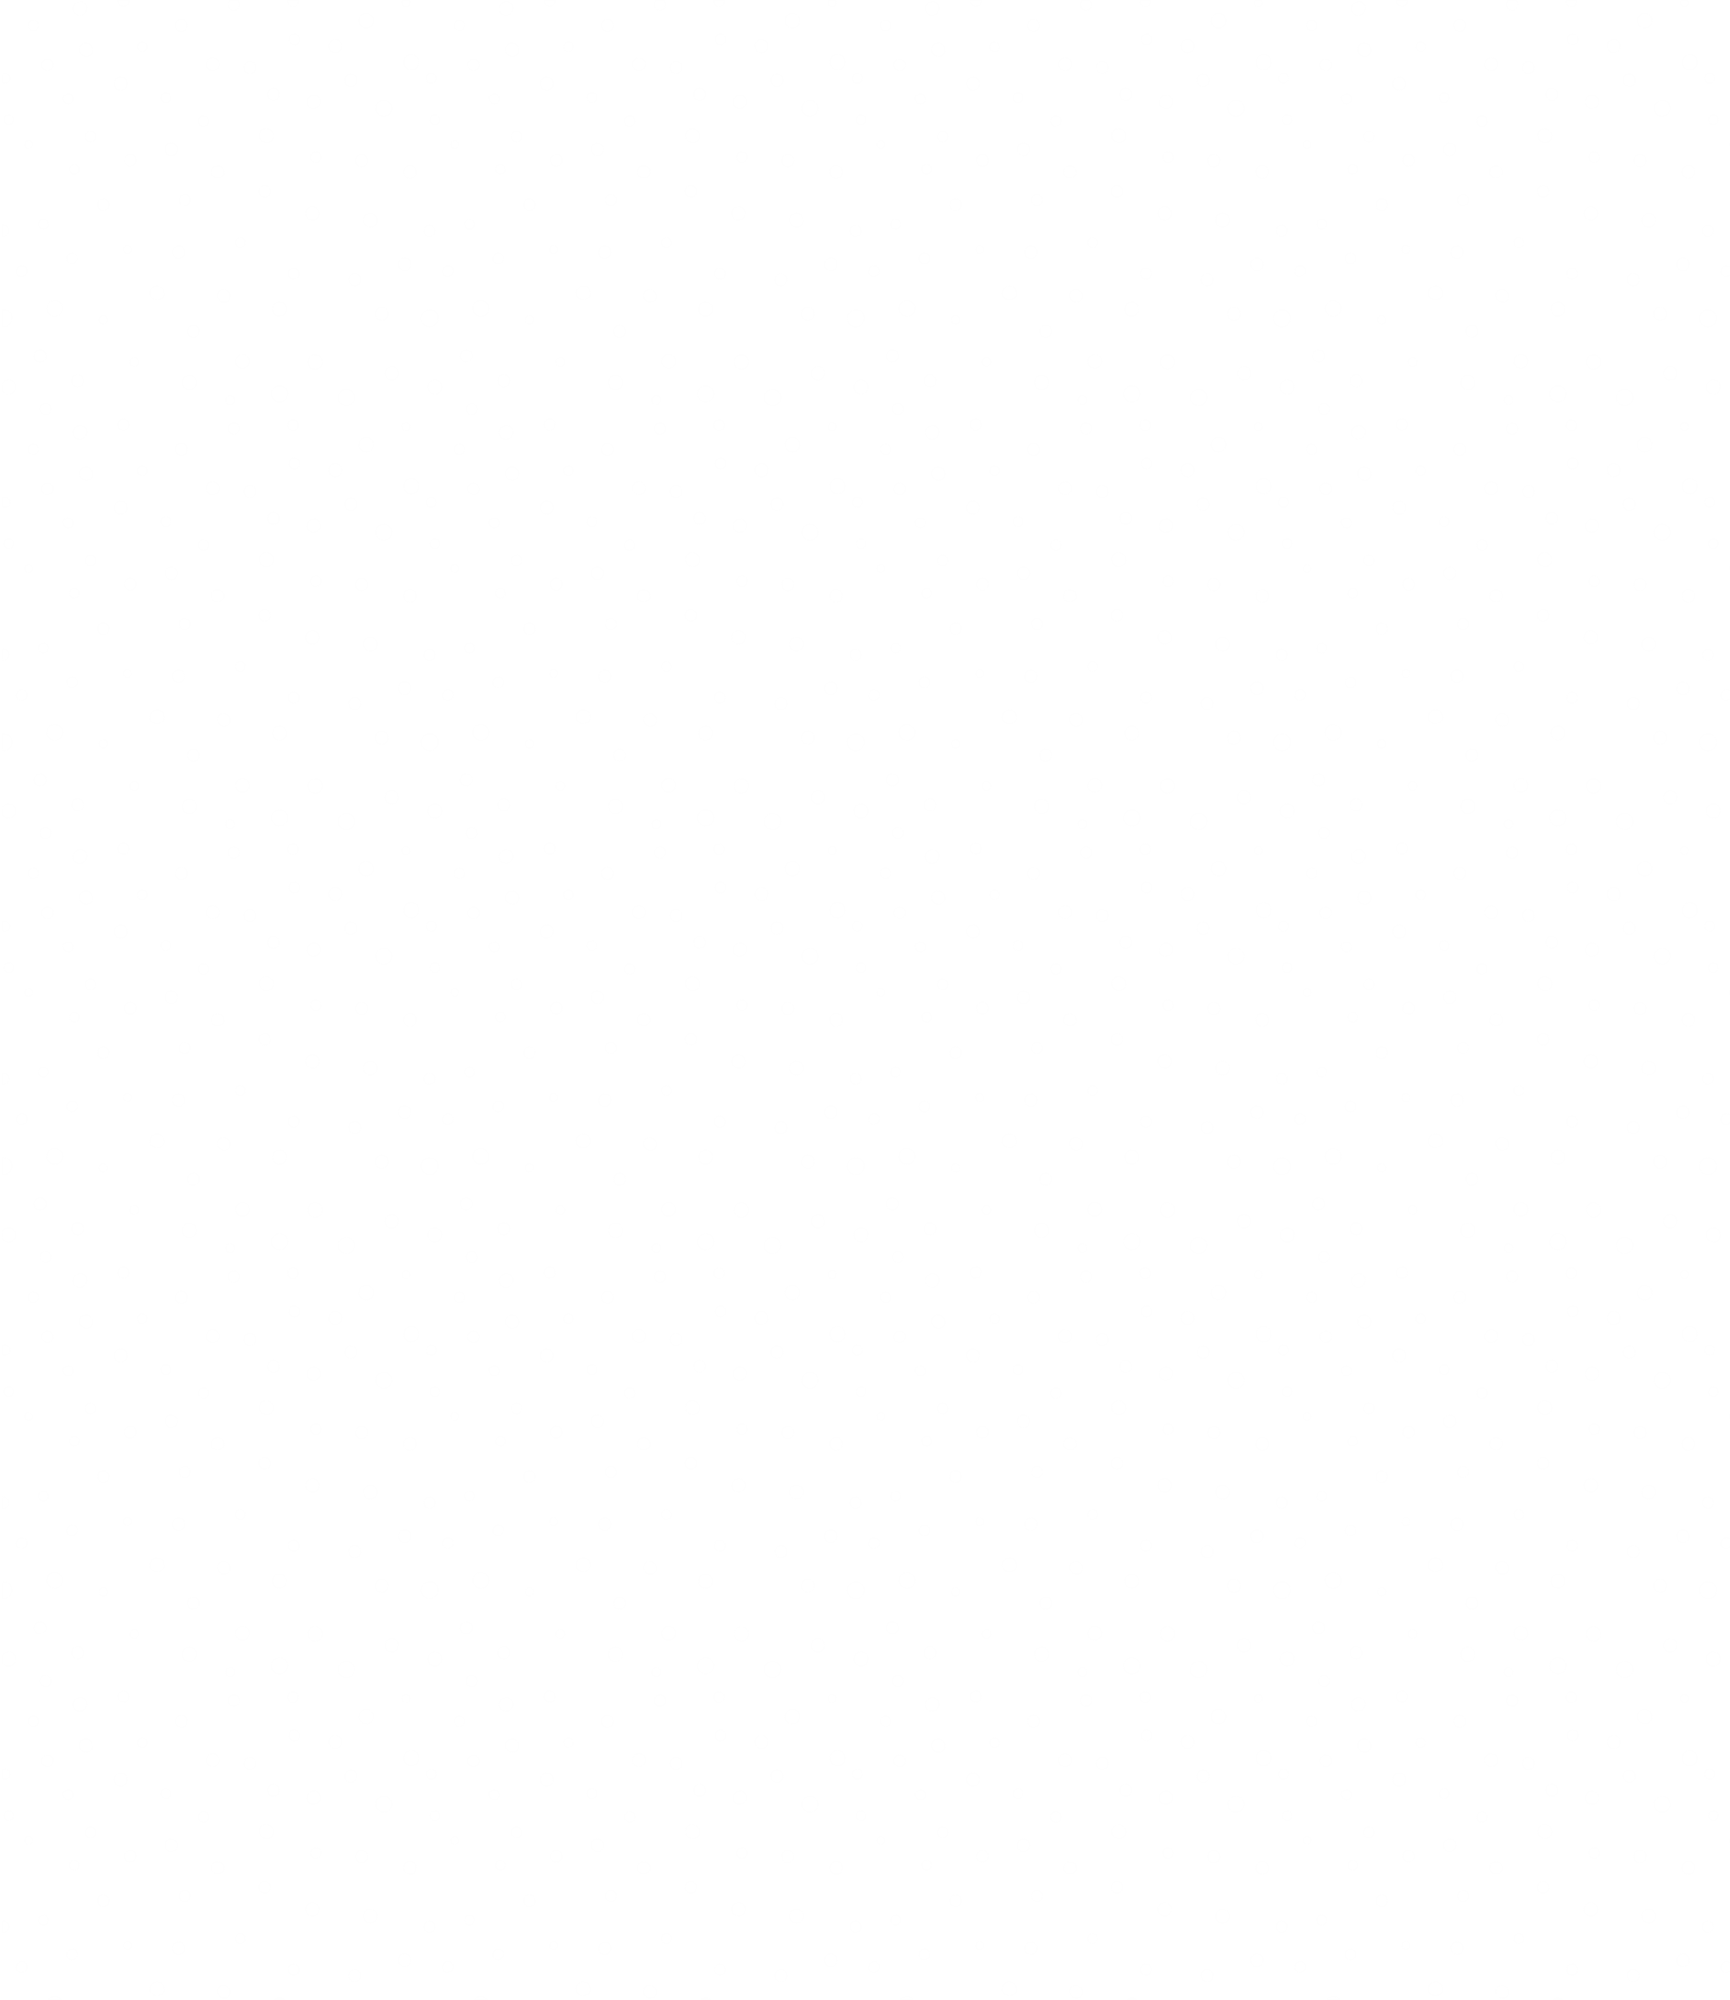 Backgrounds - Snowy Dots - White